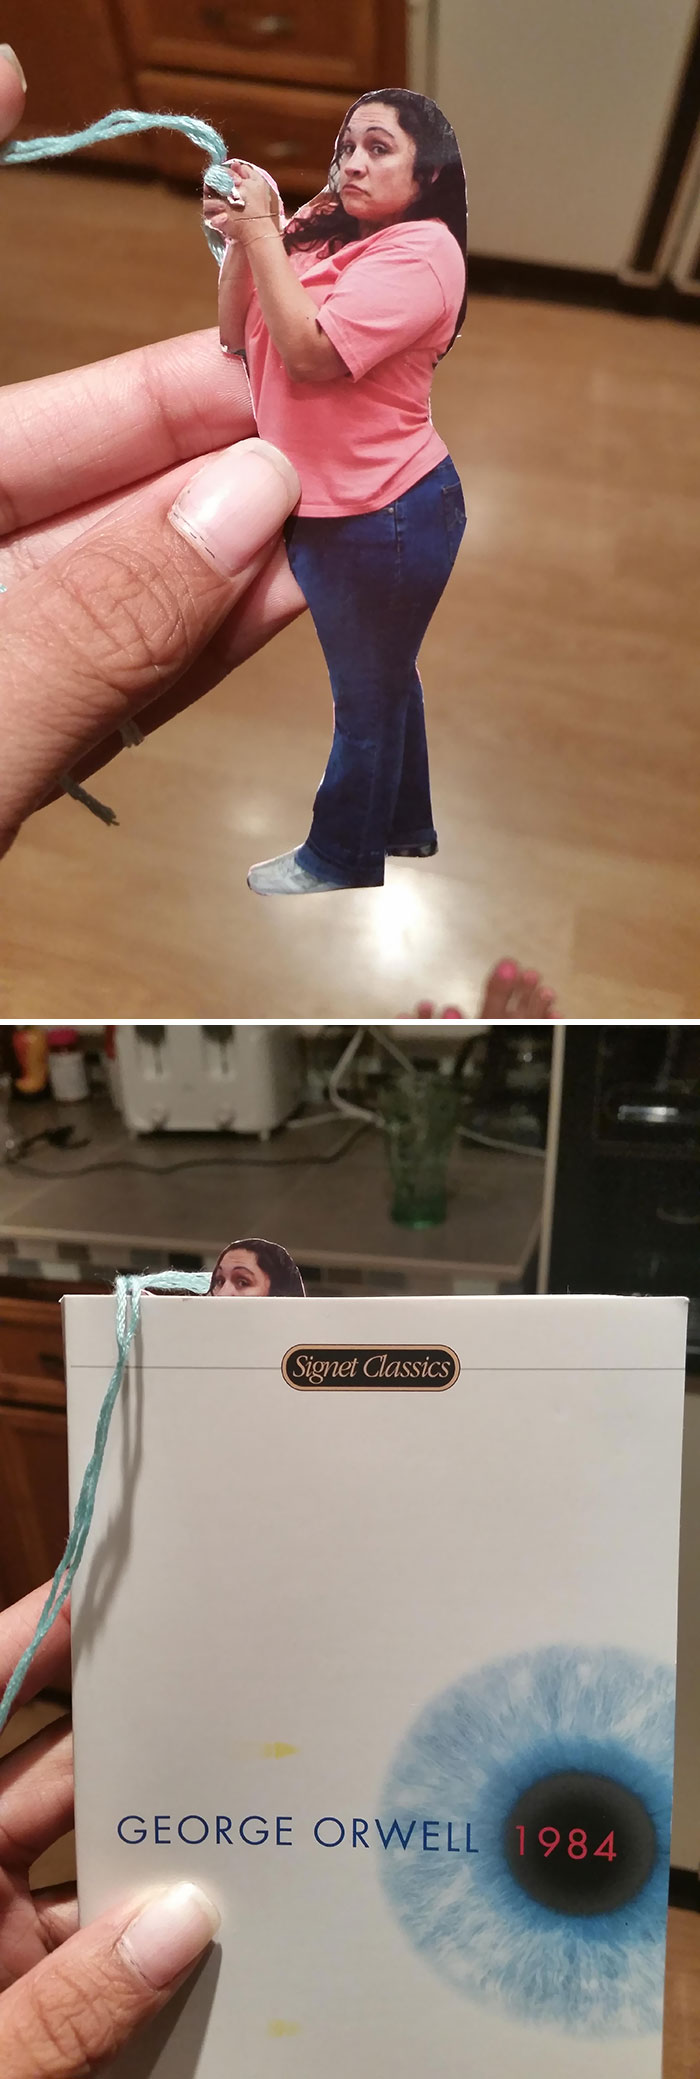 I Asked My Mom For A Cool Bookmark And This Is What She Gave Me (Yes, That Is My Mother)